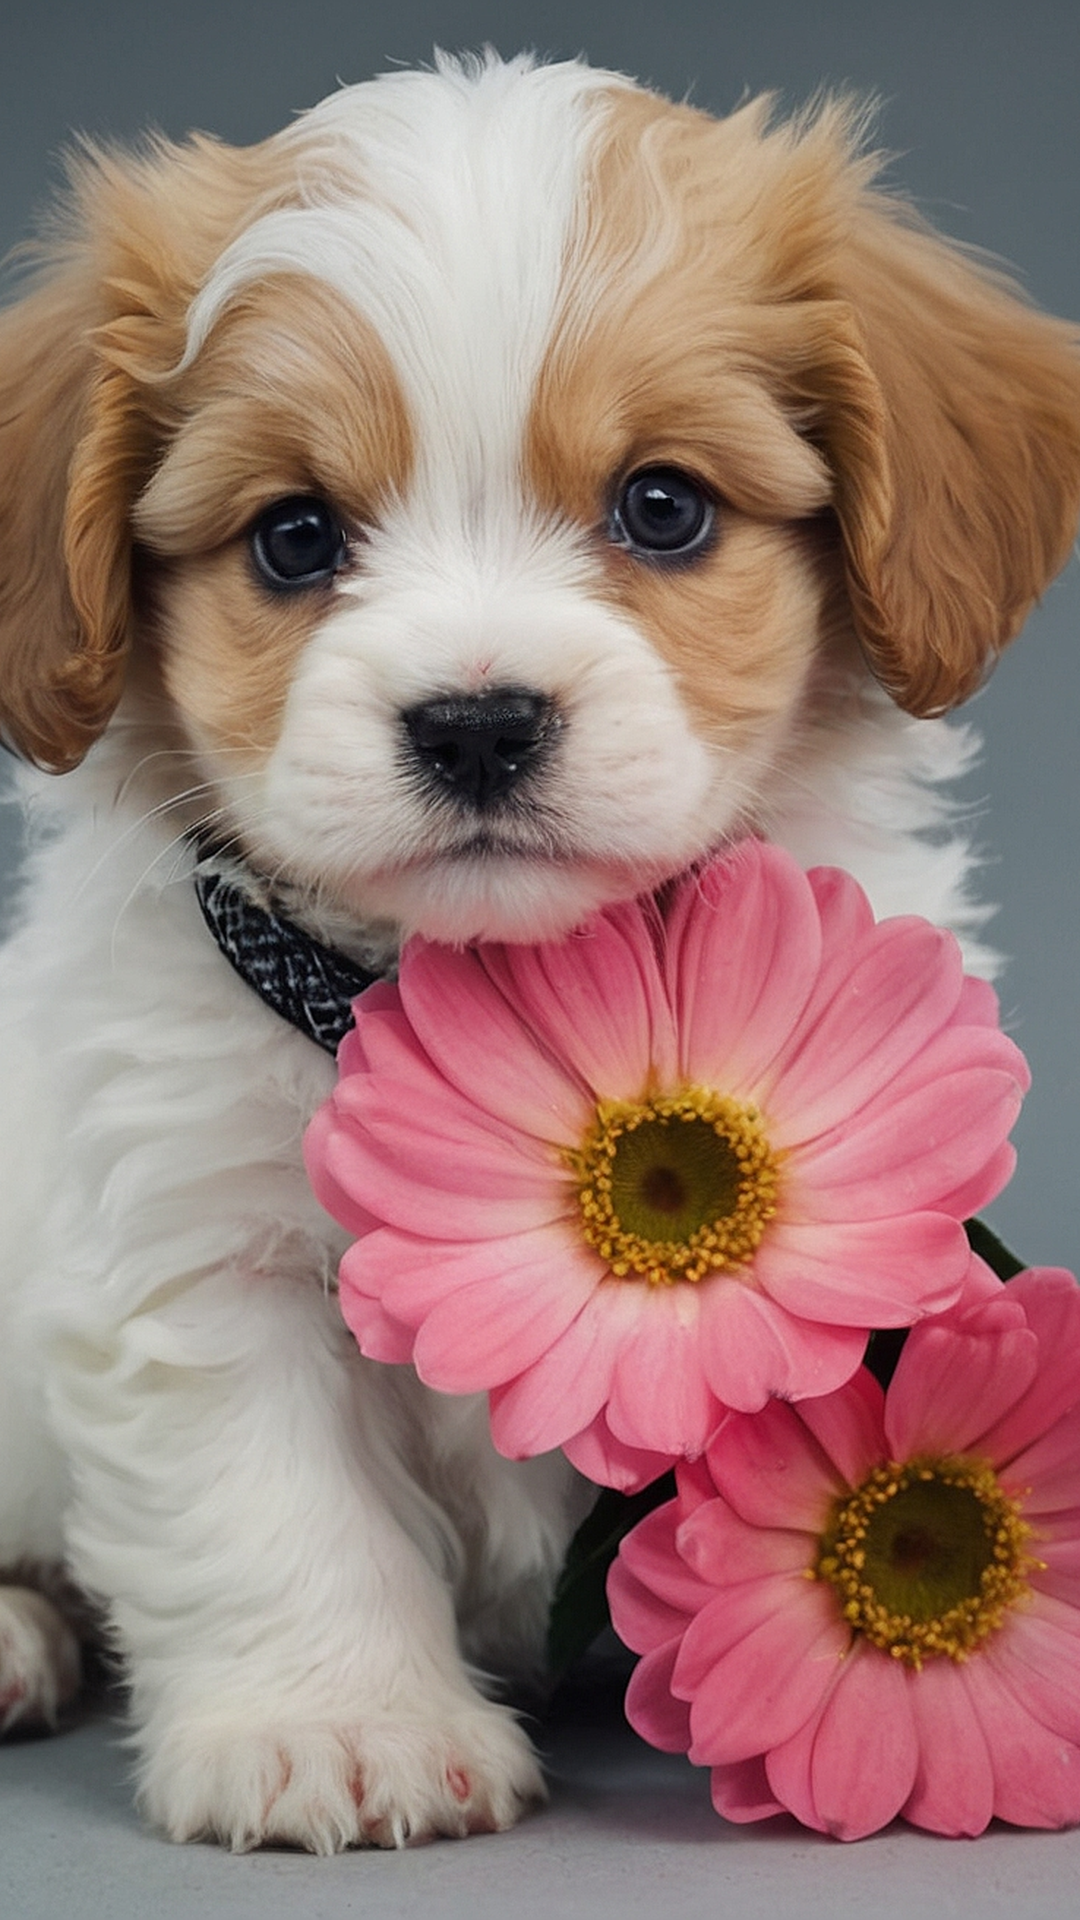 Sweeter than Sugar: Teacup Puppies in Pictures